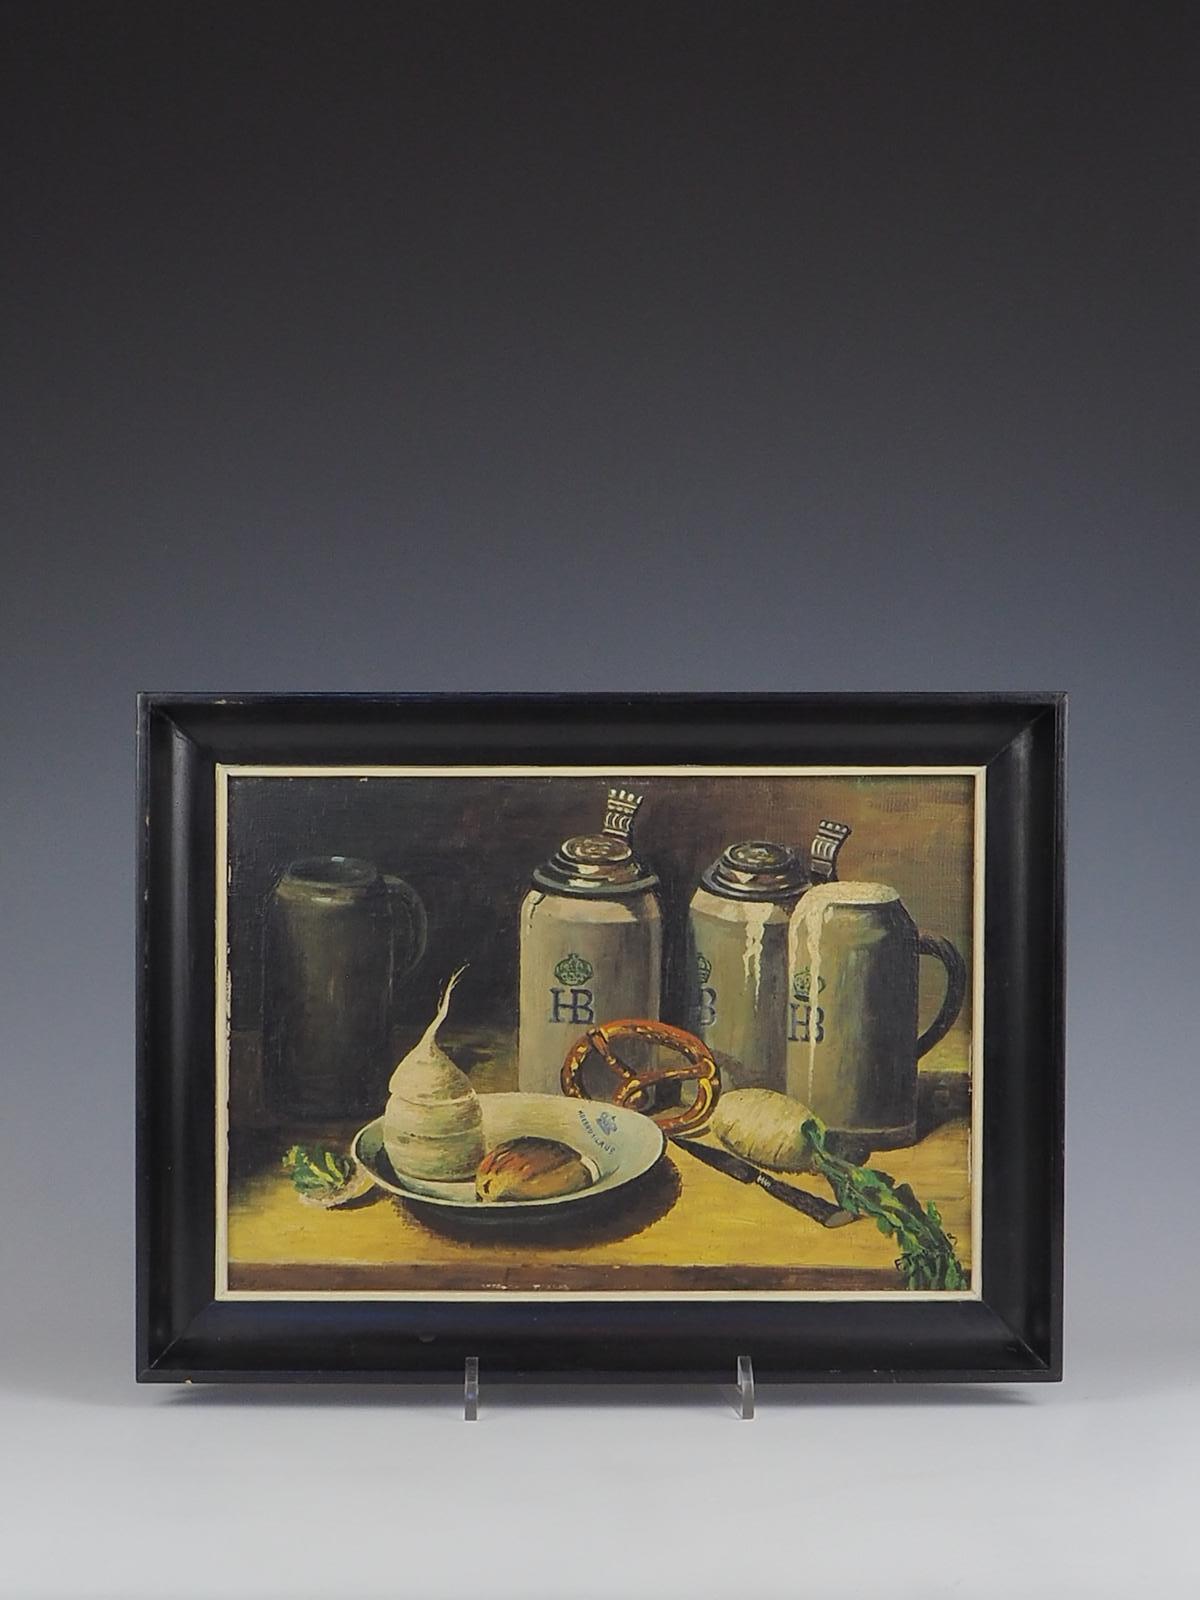 Original Oil Painting French Kitchen Still Life

Great moody setting, complete with black frame

Signed 